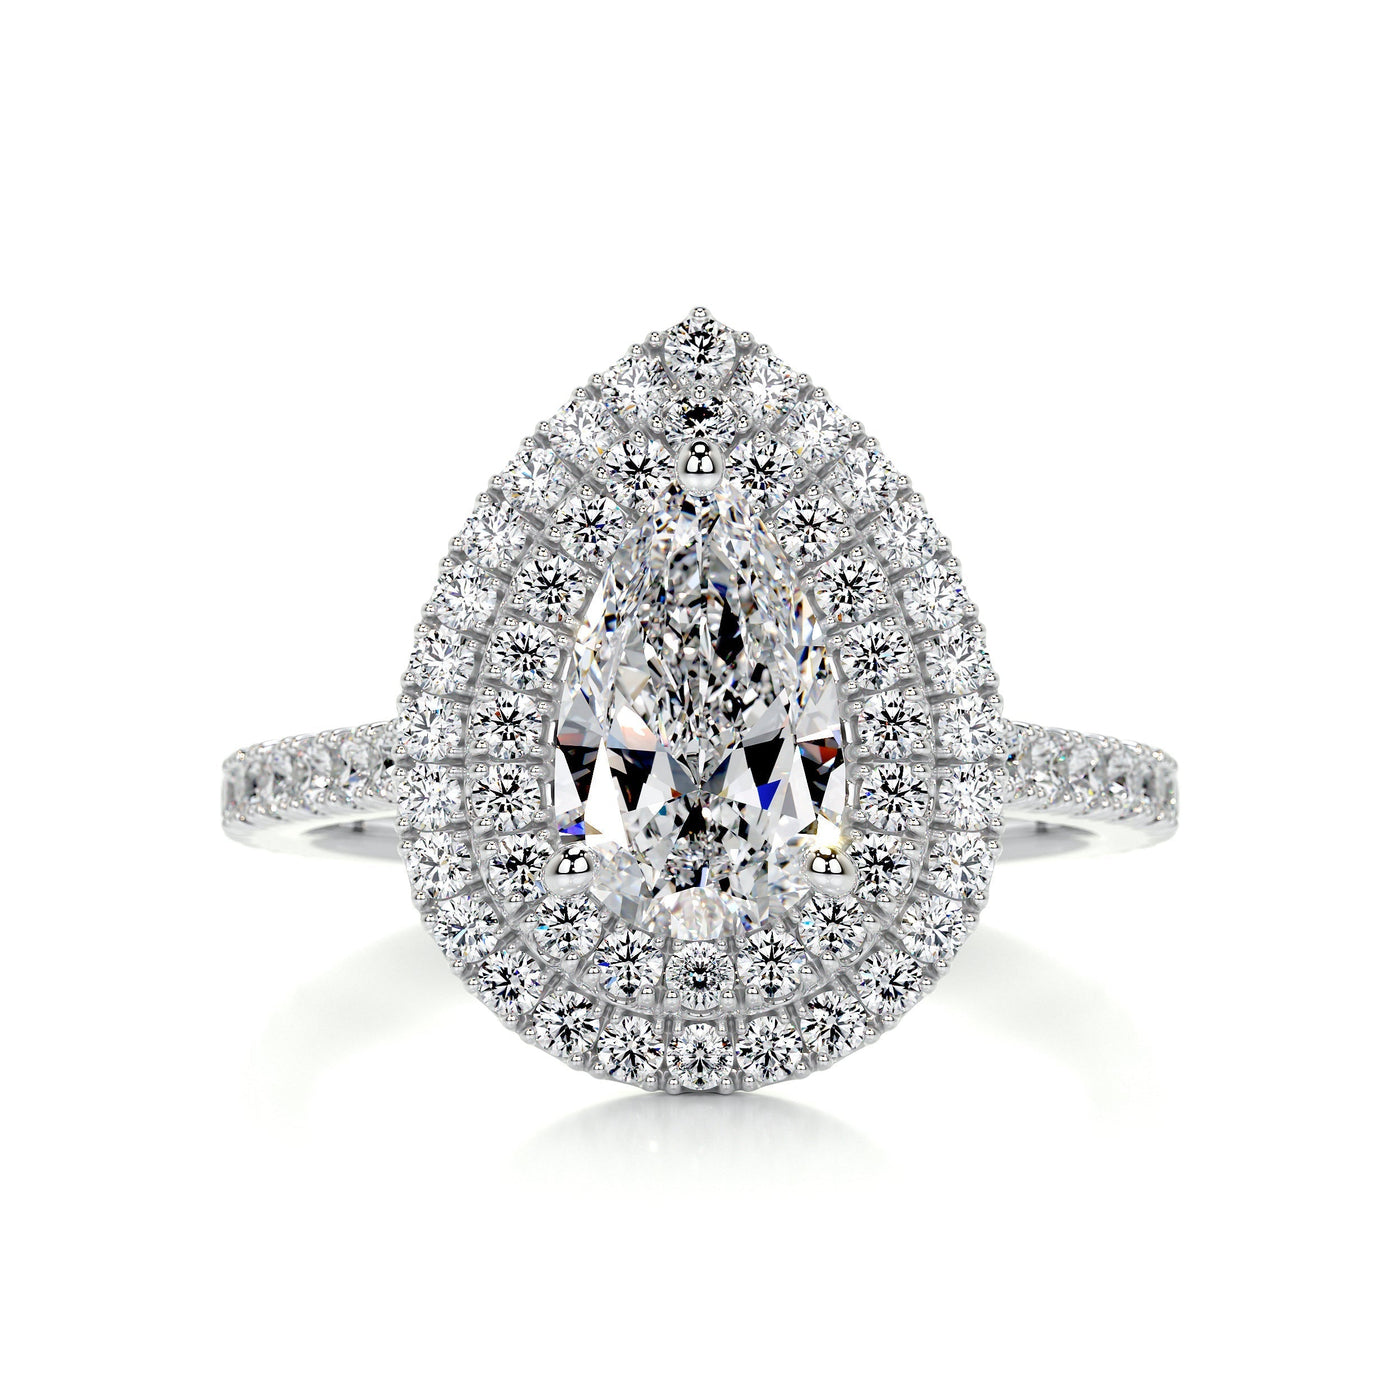 1.65 Carat Pear Double Halo Moissanite Engagement Ring